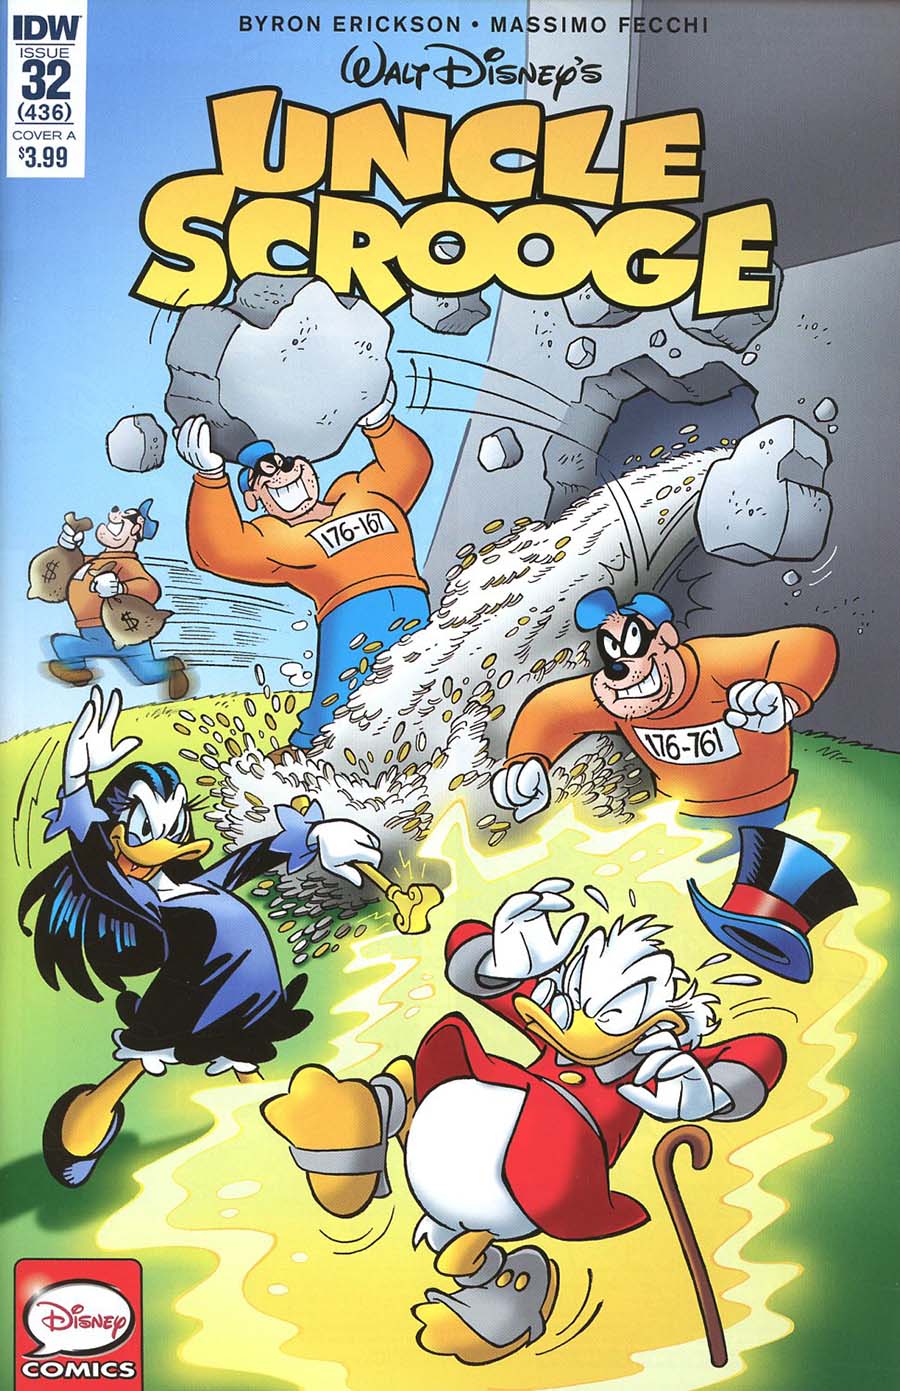 Uncle Scrooge Vol 2 #32 Cover A Regular Massimo Fecchi Cover